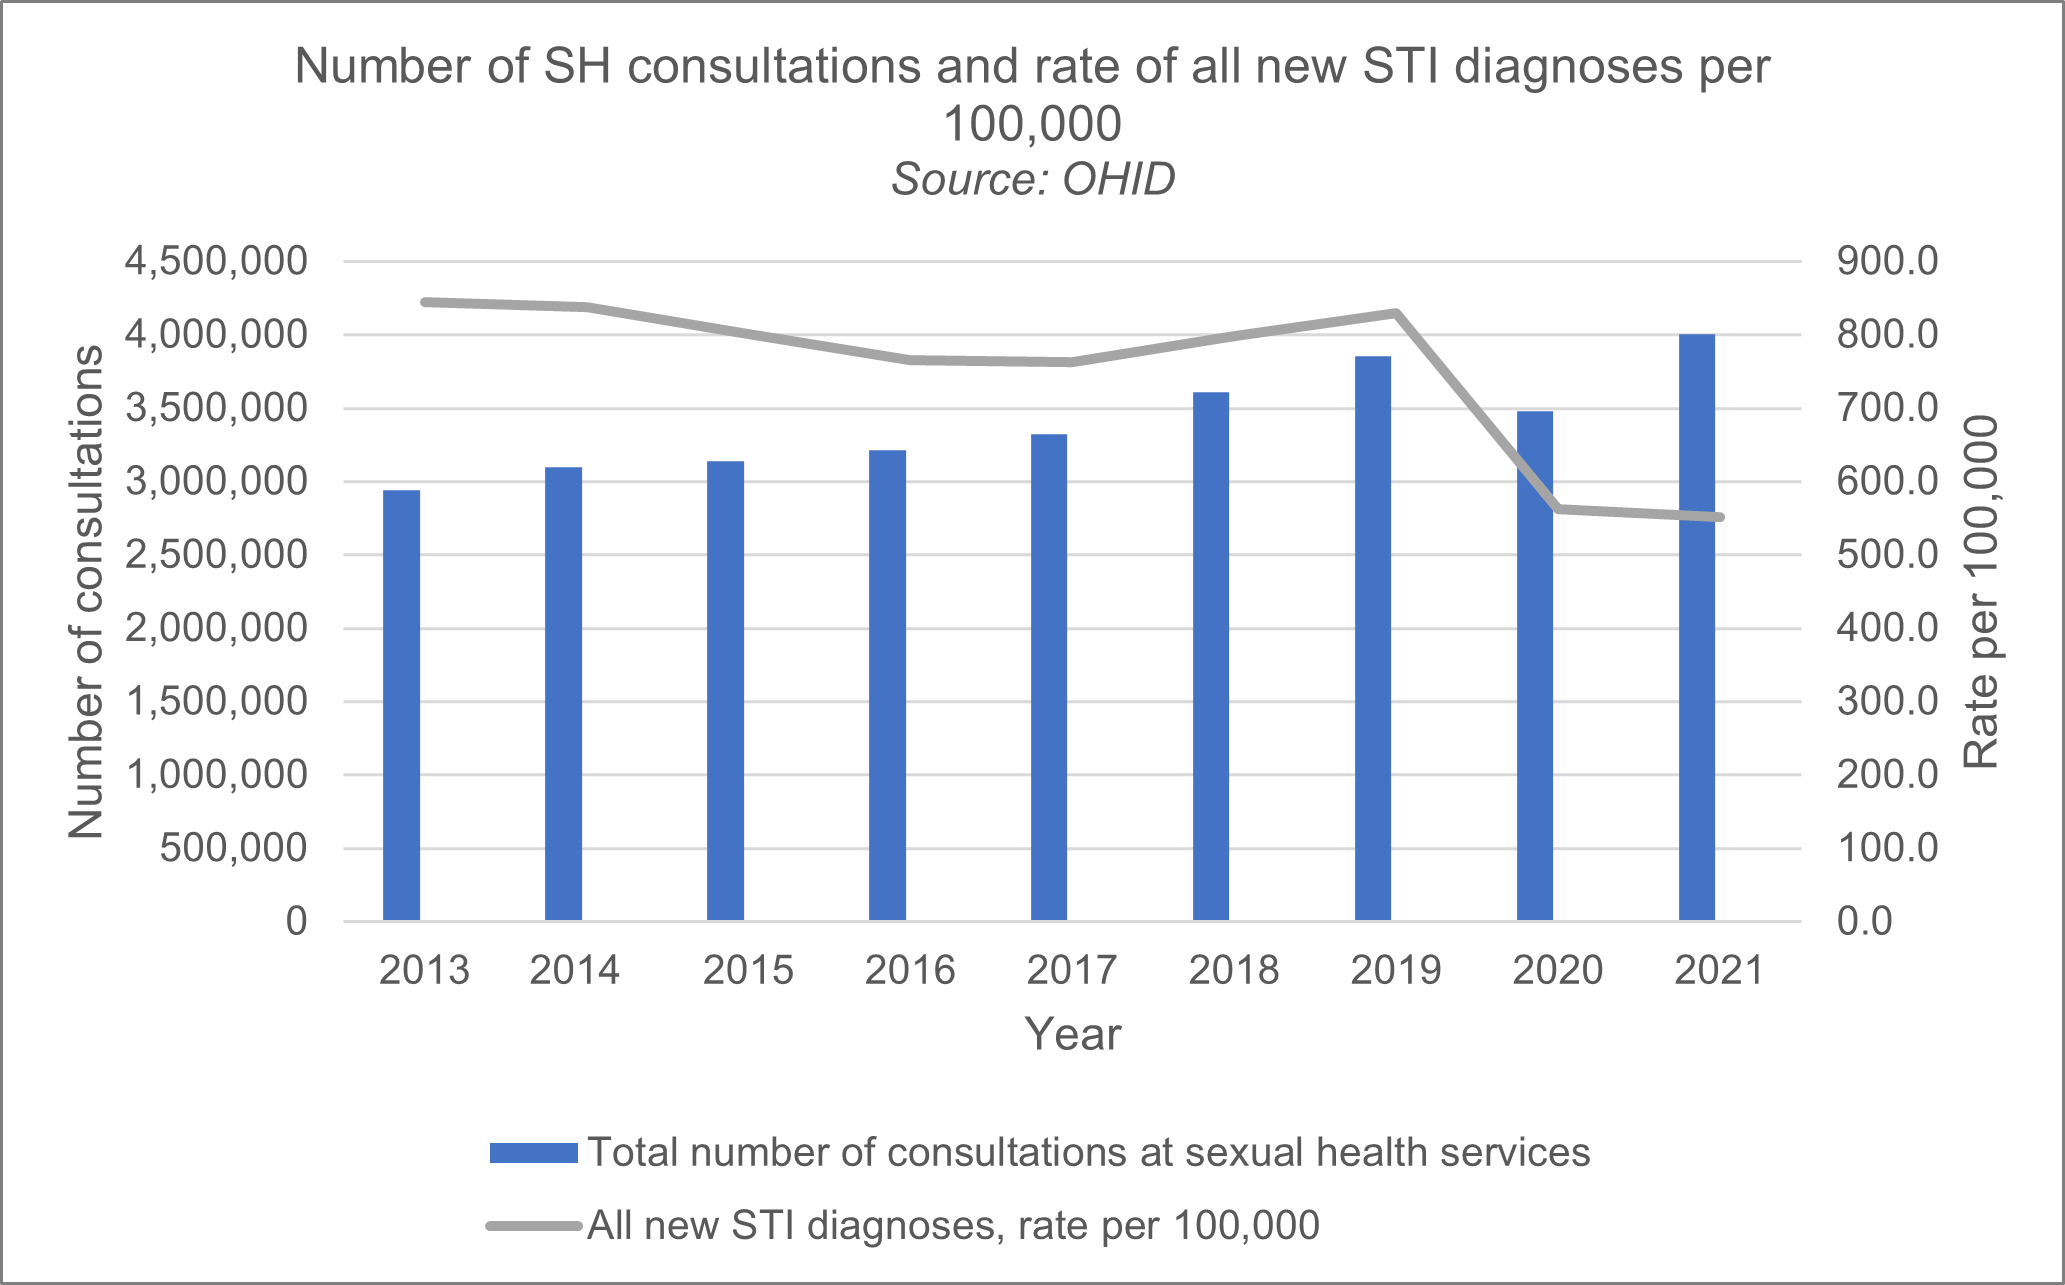 The total number of consultations at sexual health services rose from from 2.9 million in 2013 to over 4 million in 2021. New STI diagnoses per 100,000 people decreased from 844.5 per 100,000 in 2013 to 551 per 100,000 in 2021. The rate of new STI diagnoses decreased between 2013 but peaked again in 2019 with a rate of 829 per 100,000 before decreasing to 551 per 100,000 in 2021.